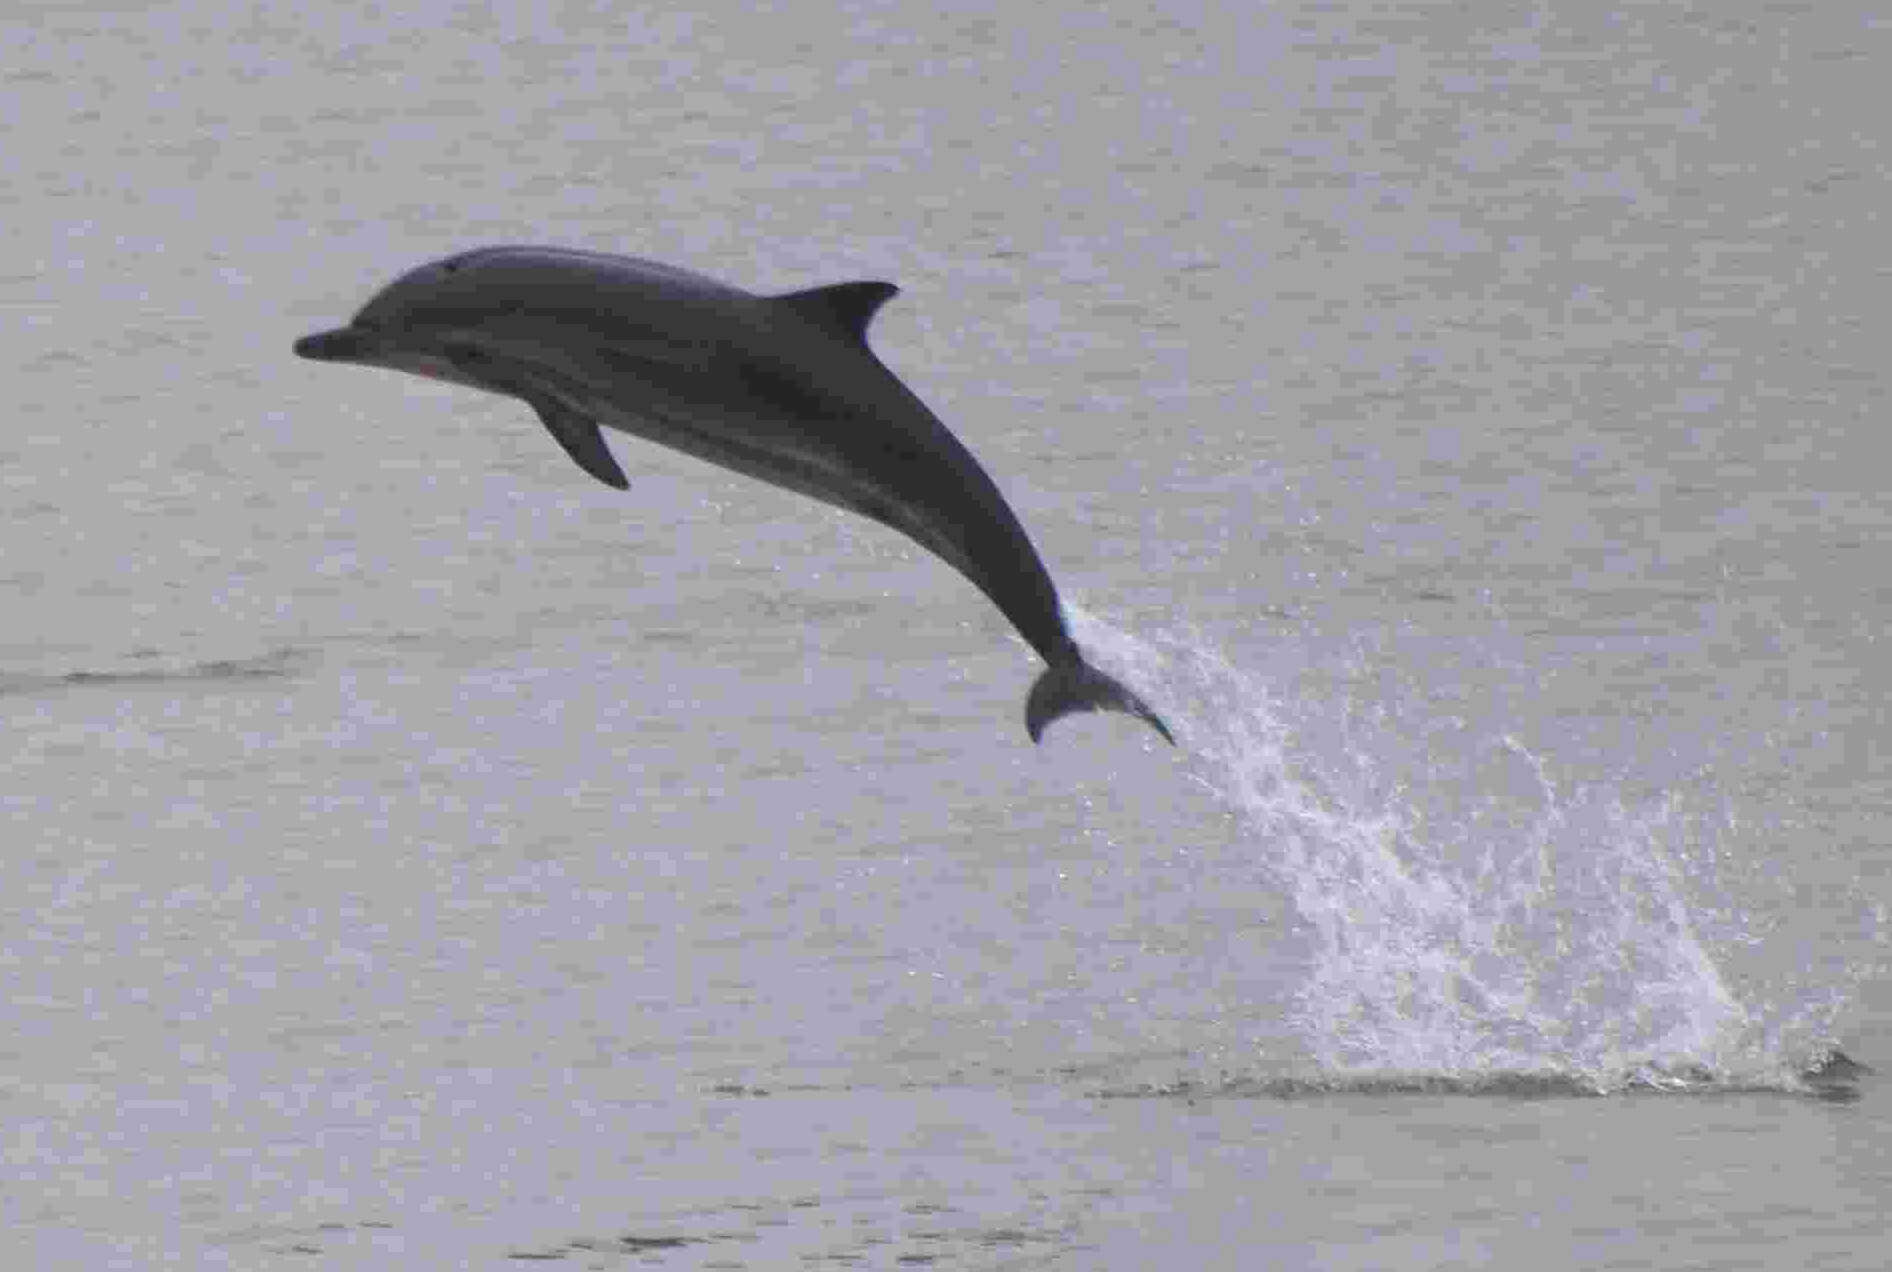 Image of Blue-white Dolphin